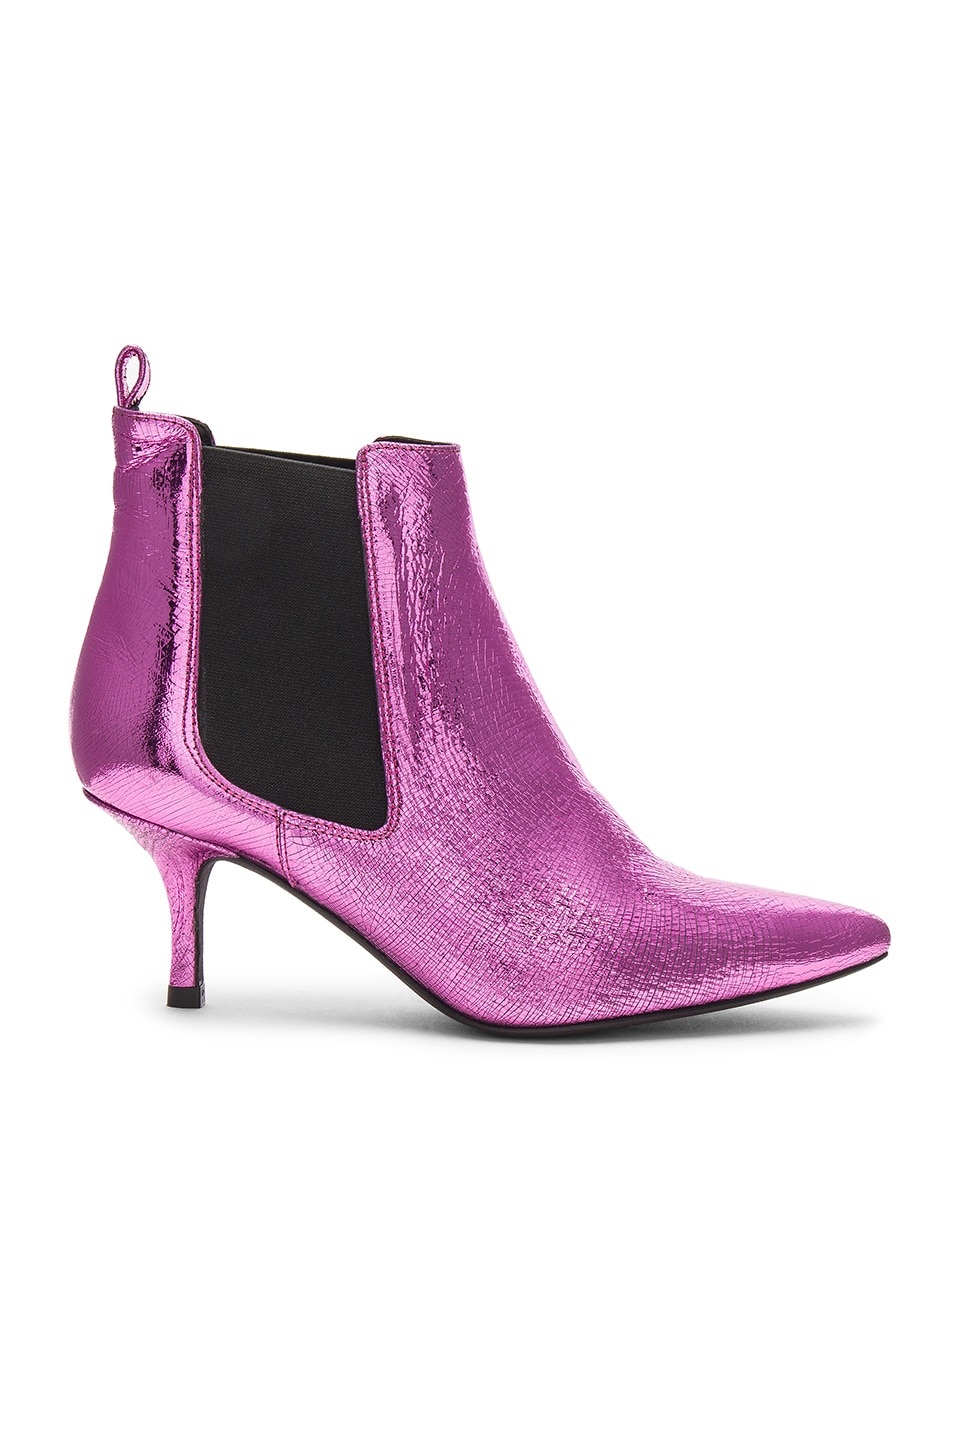 ANINE BING Stevie Boots in Hot Pink | REVOLVE